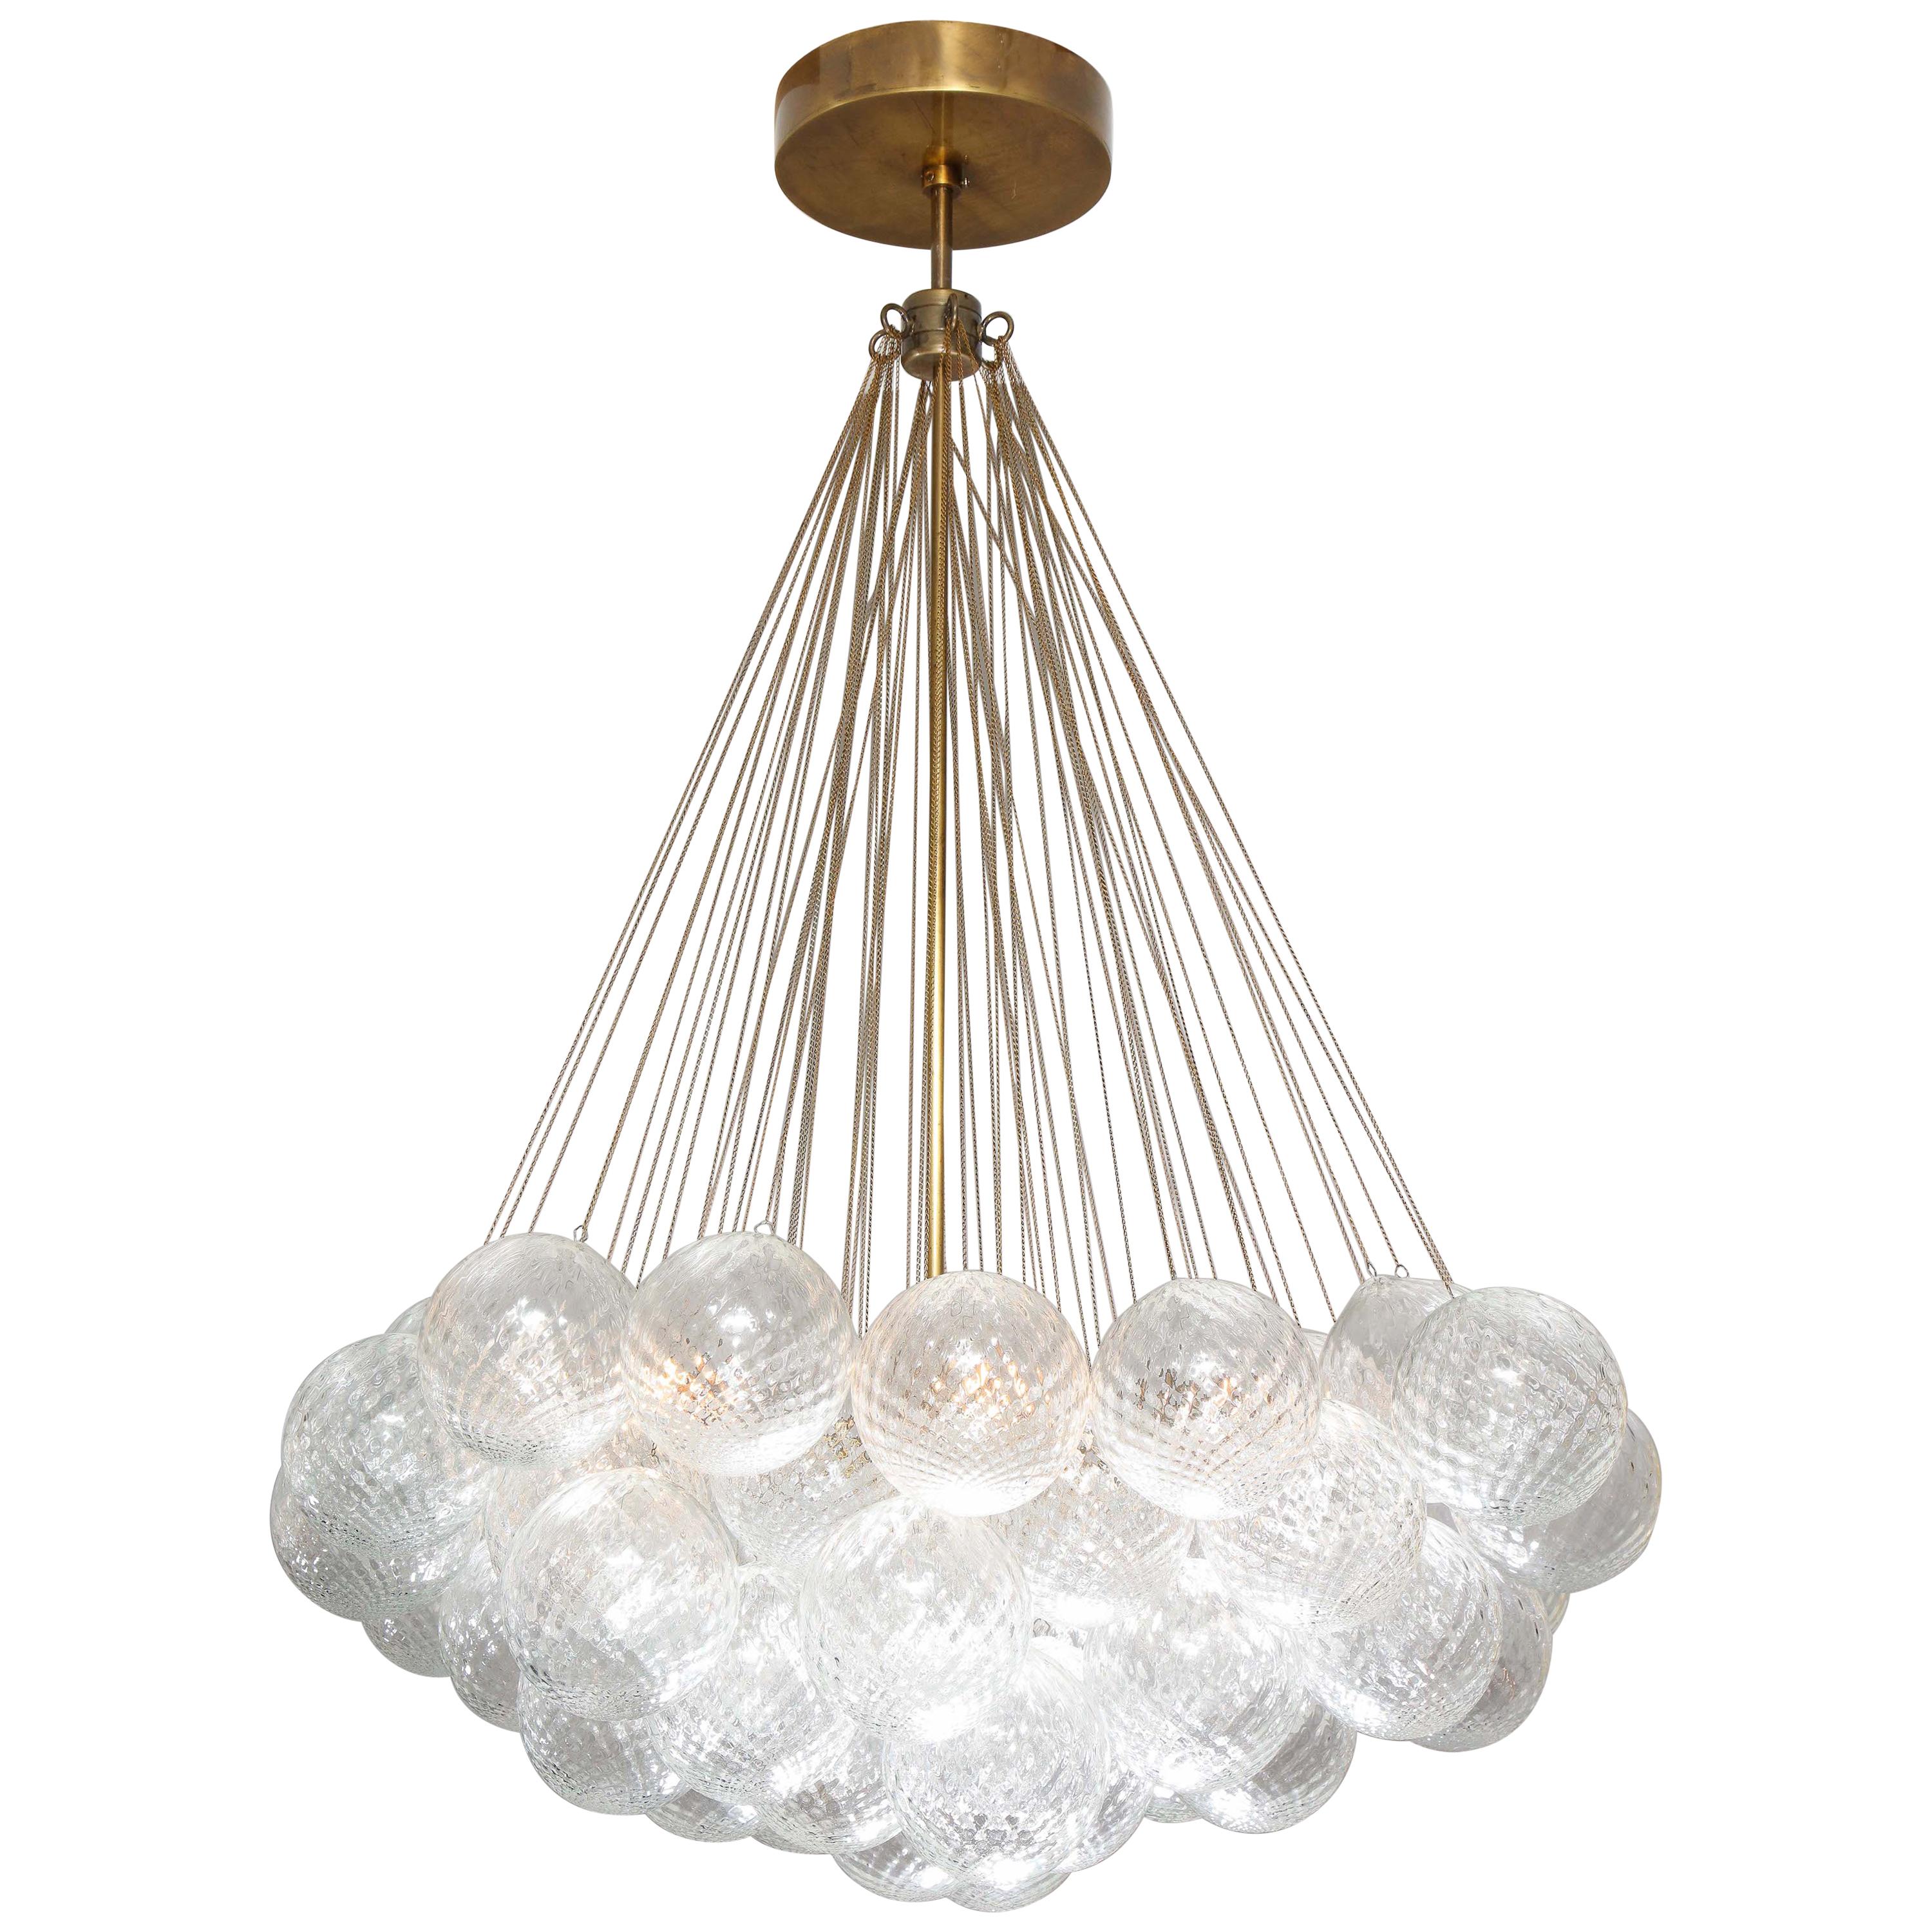 Murano Floating Clustered Globe Chandelier For Sale